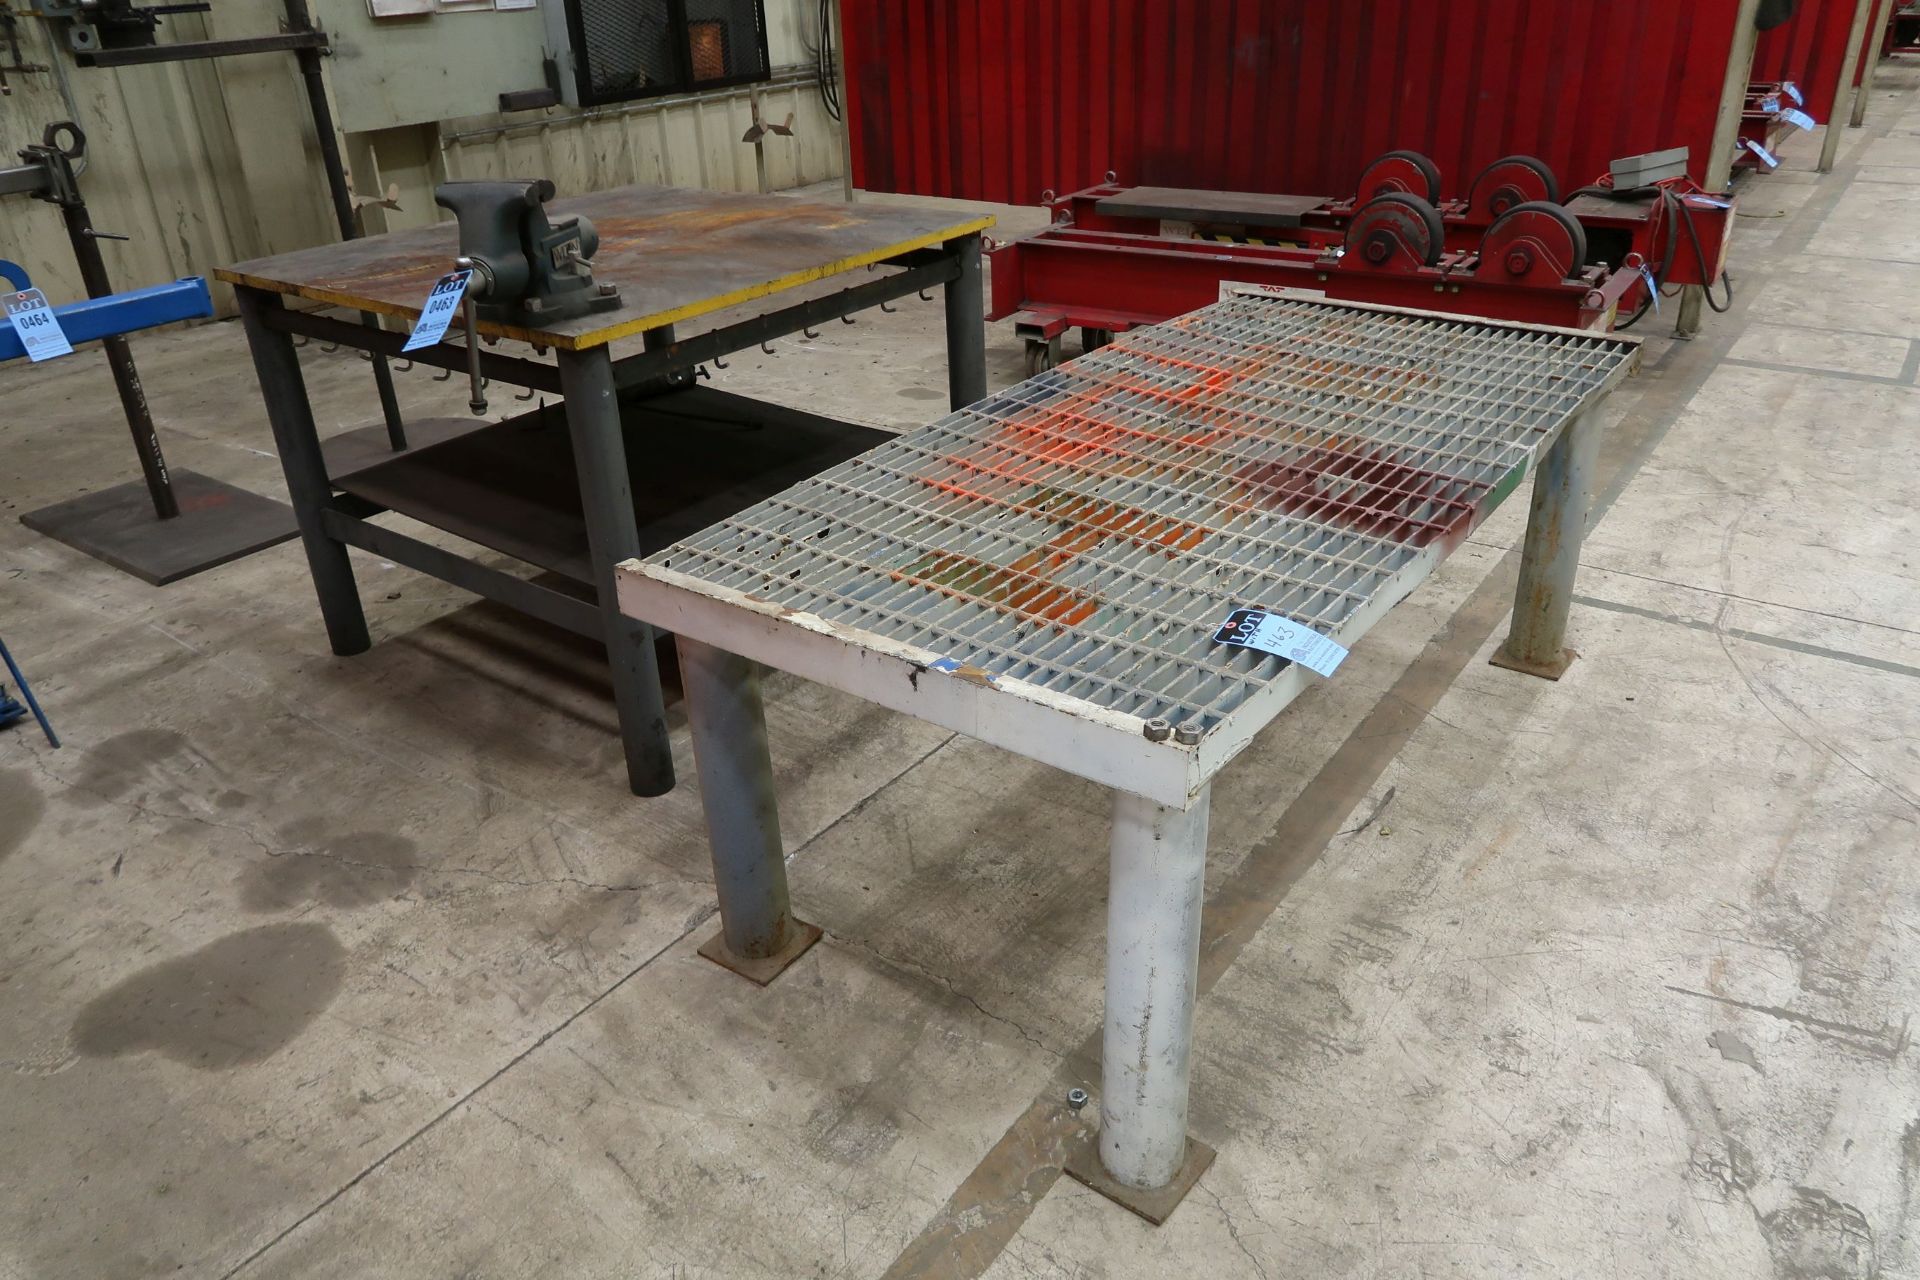 48" X 48" X 37" HIGH X 1" THICK TOP PLATE STEEL PIPE WELDED FRAME WELDING TABLE W/ STEEL GRATED